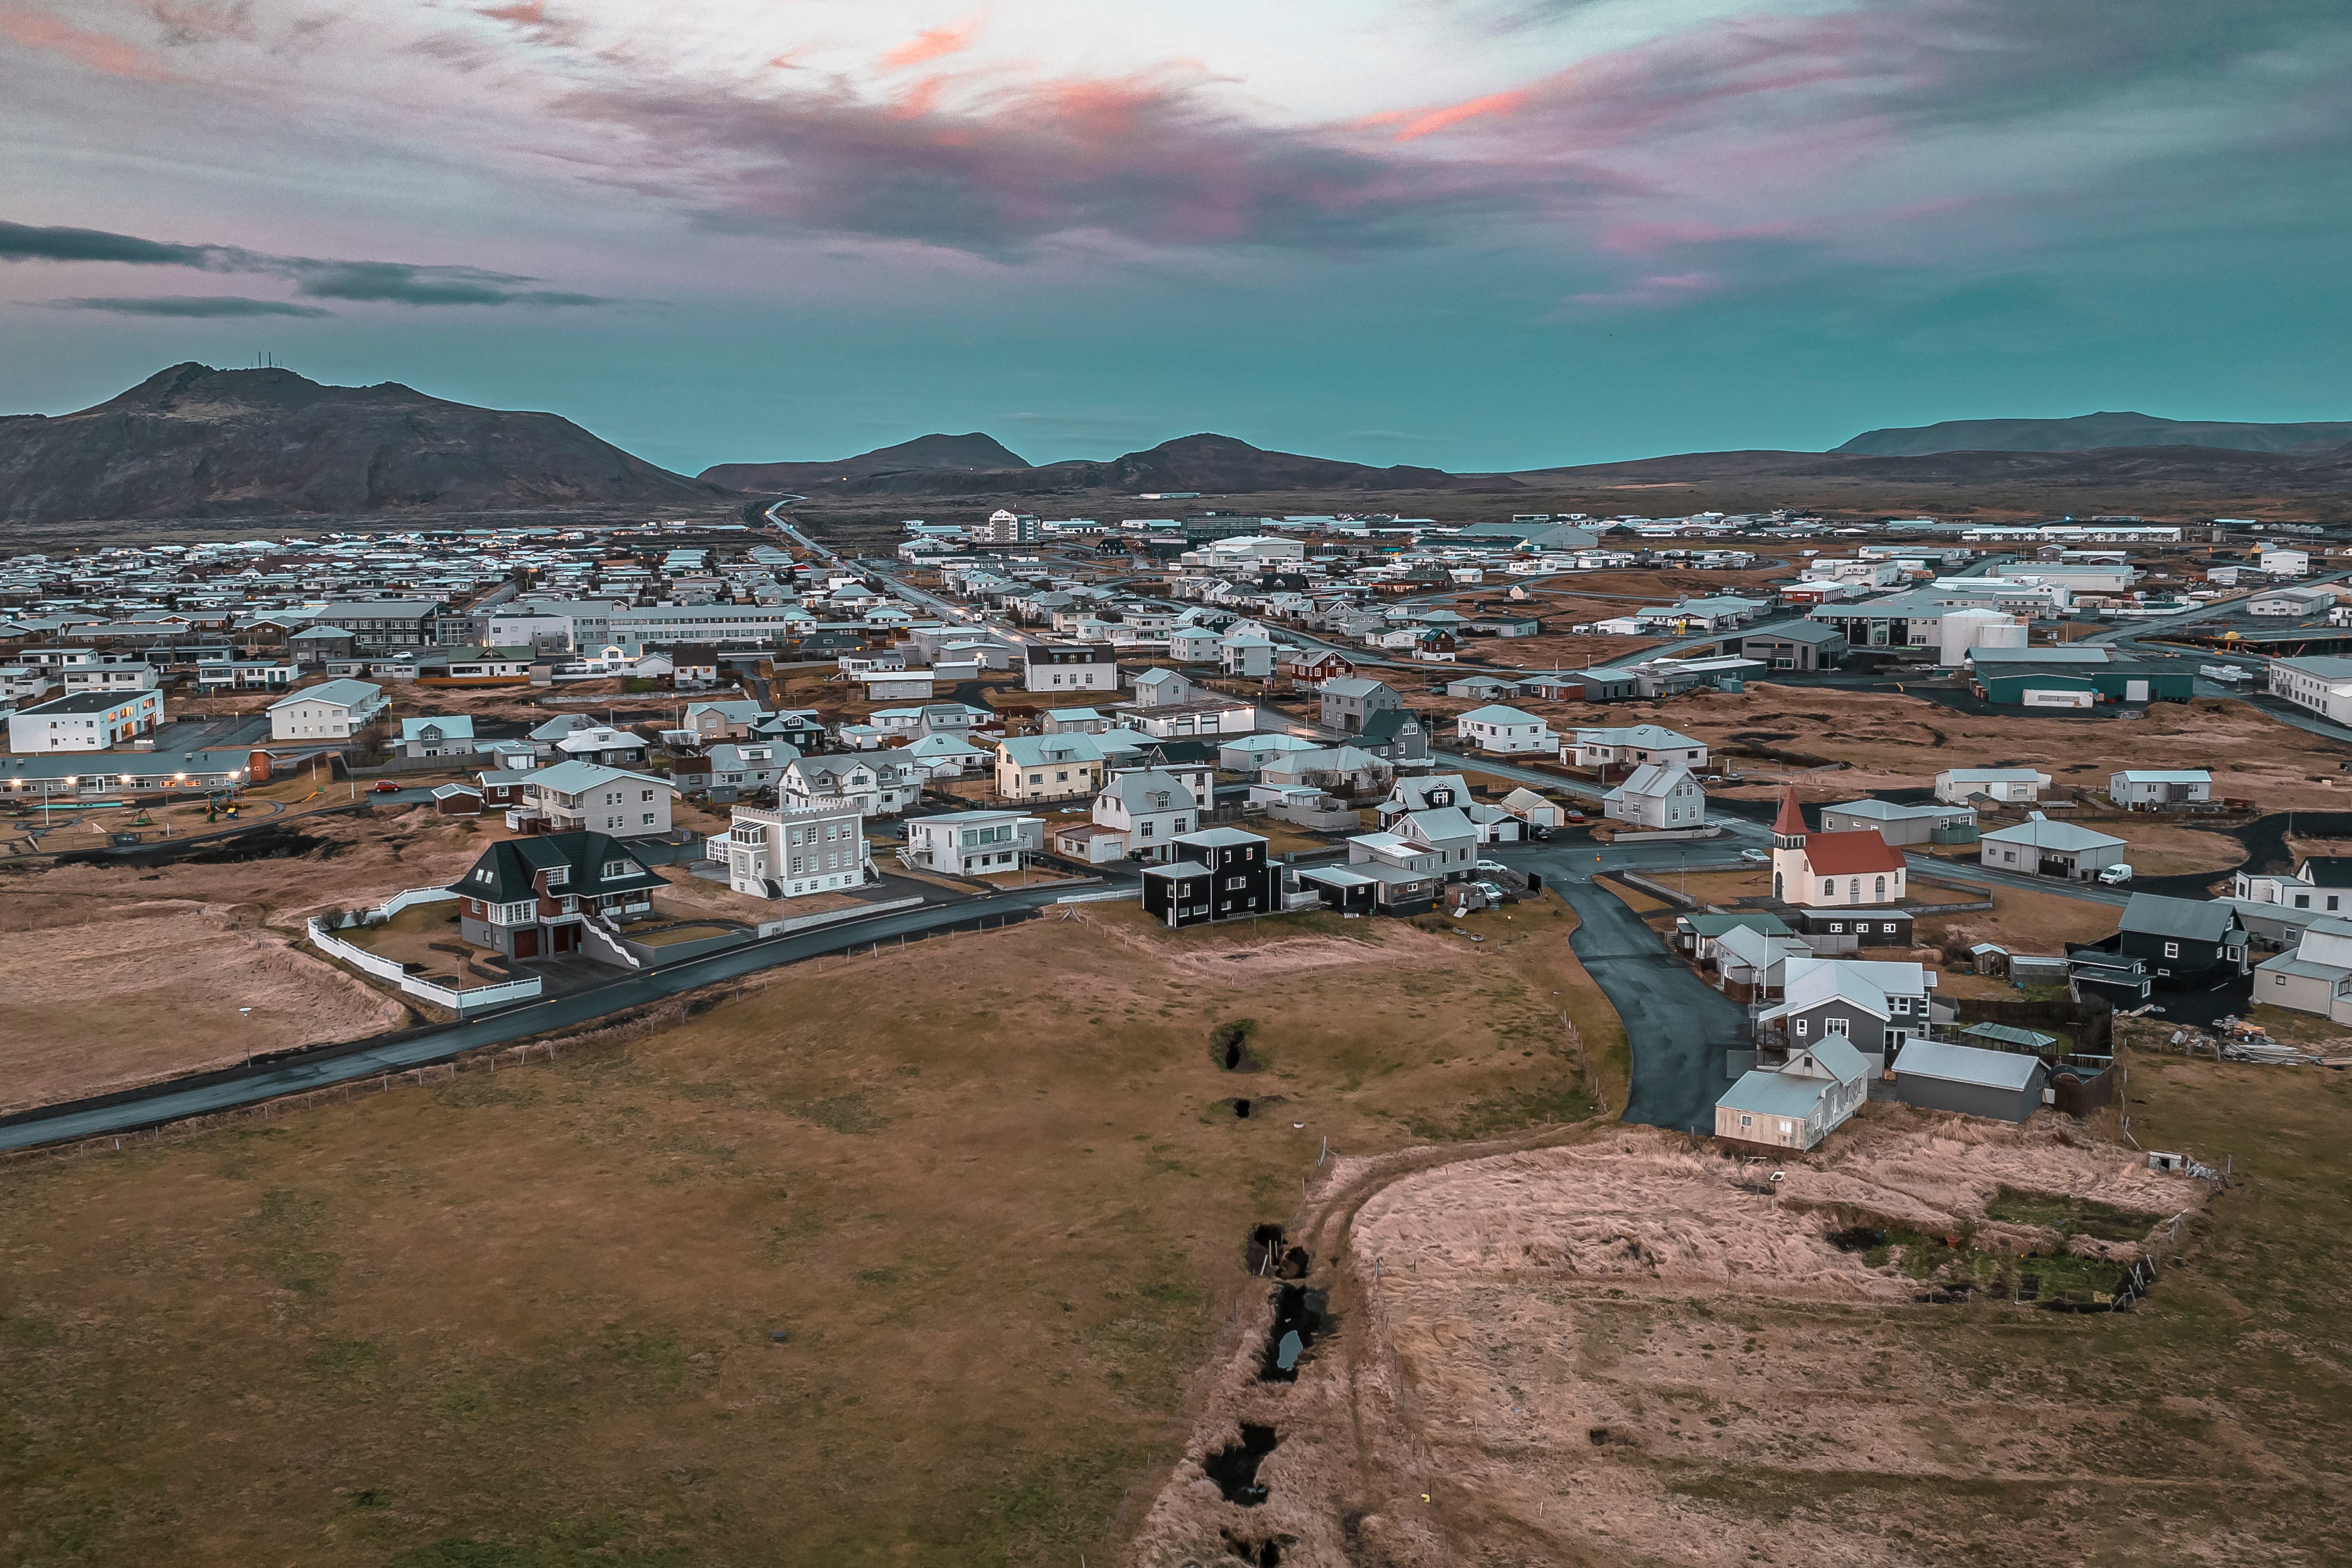 <p>This image taken with a drone shows the town of Grindavik, Iceland</p>